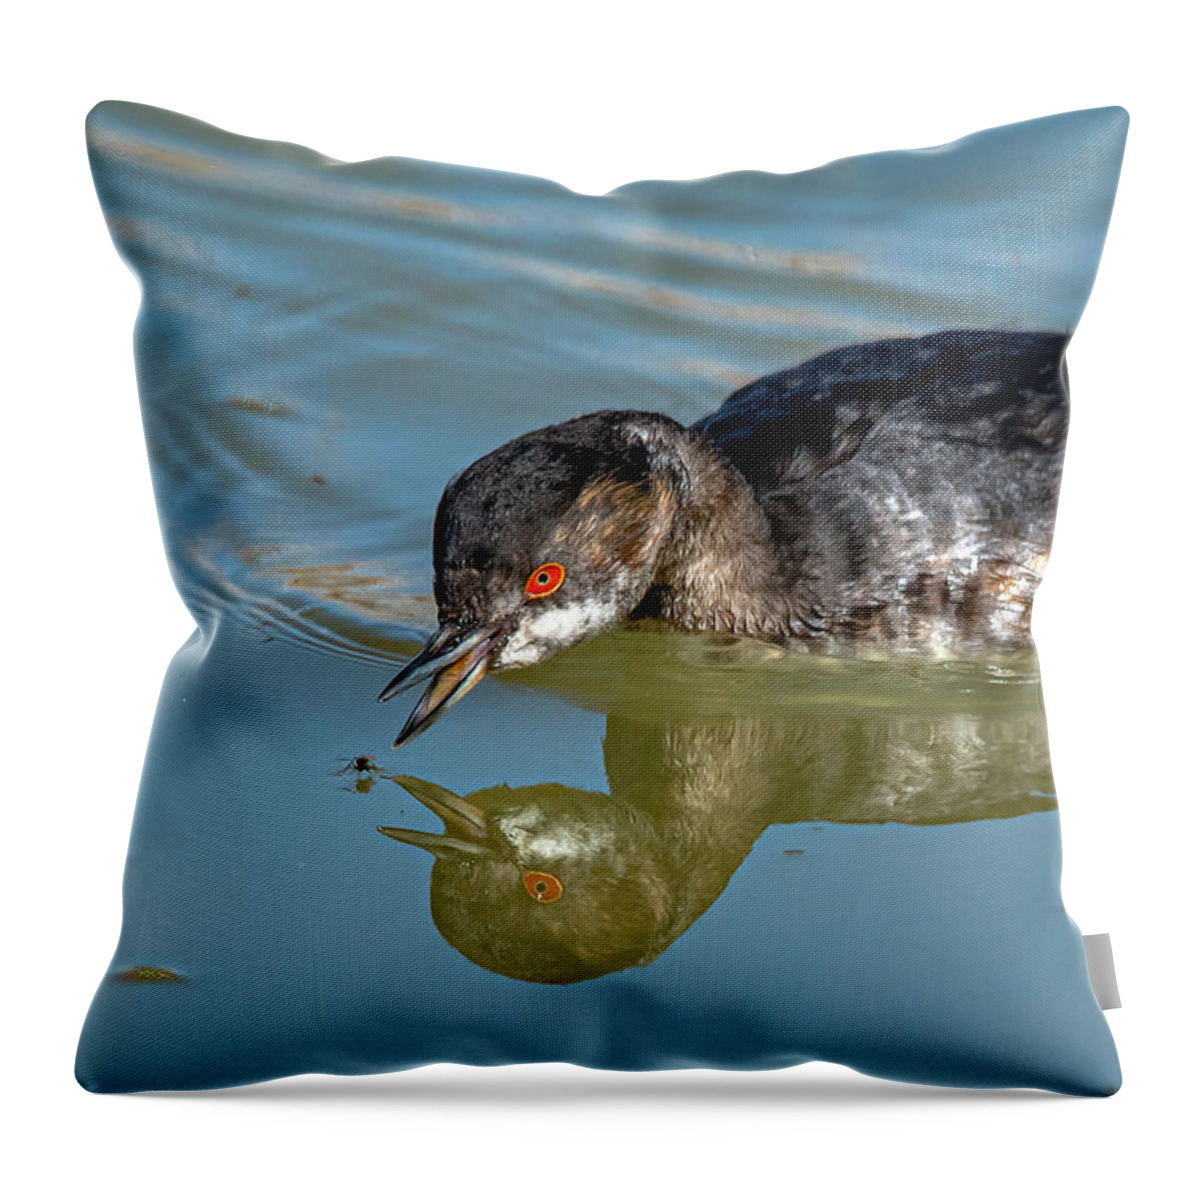 Eared Grebe Throw Pillow featuring the photograph Eared Grebe by Rick Mosher